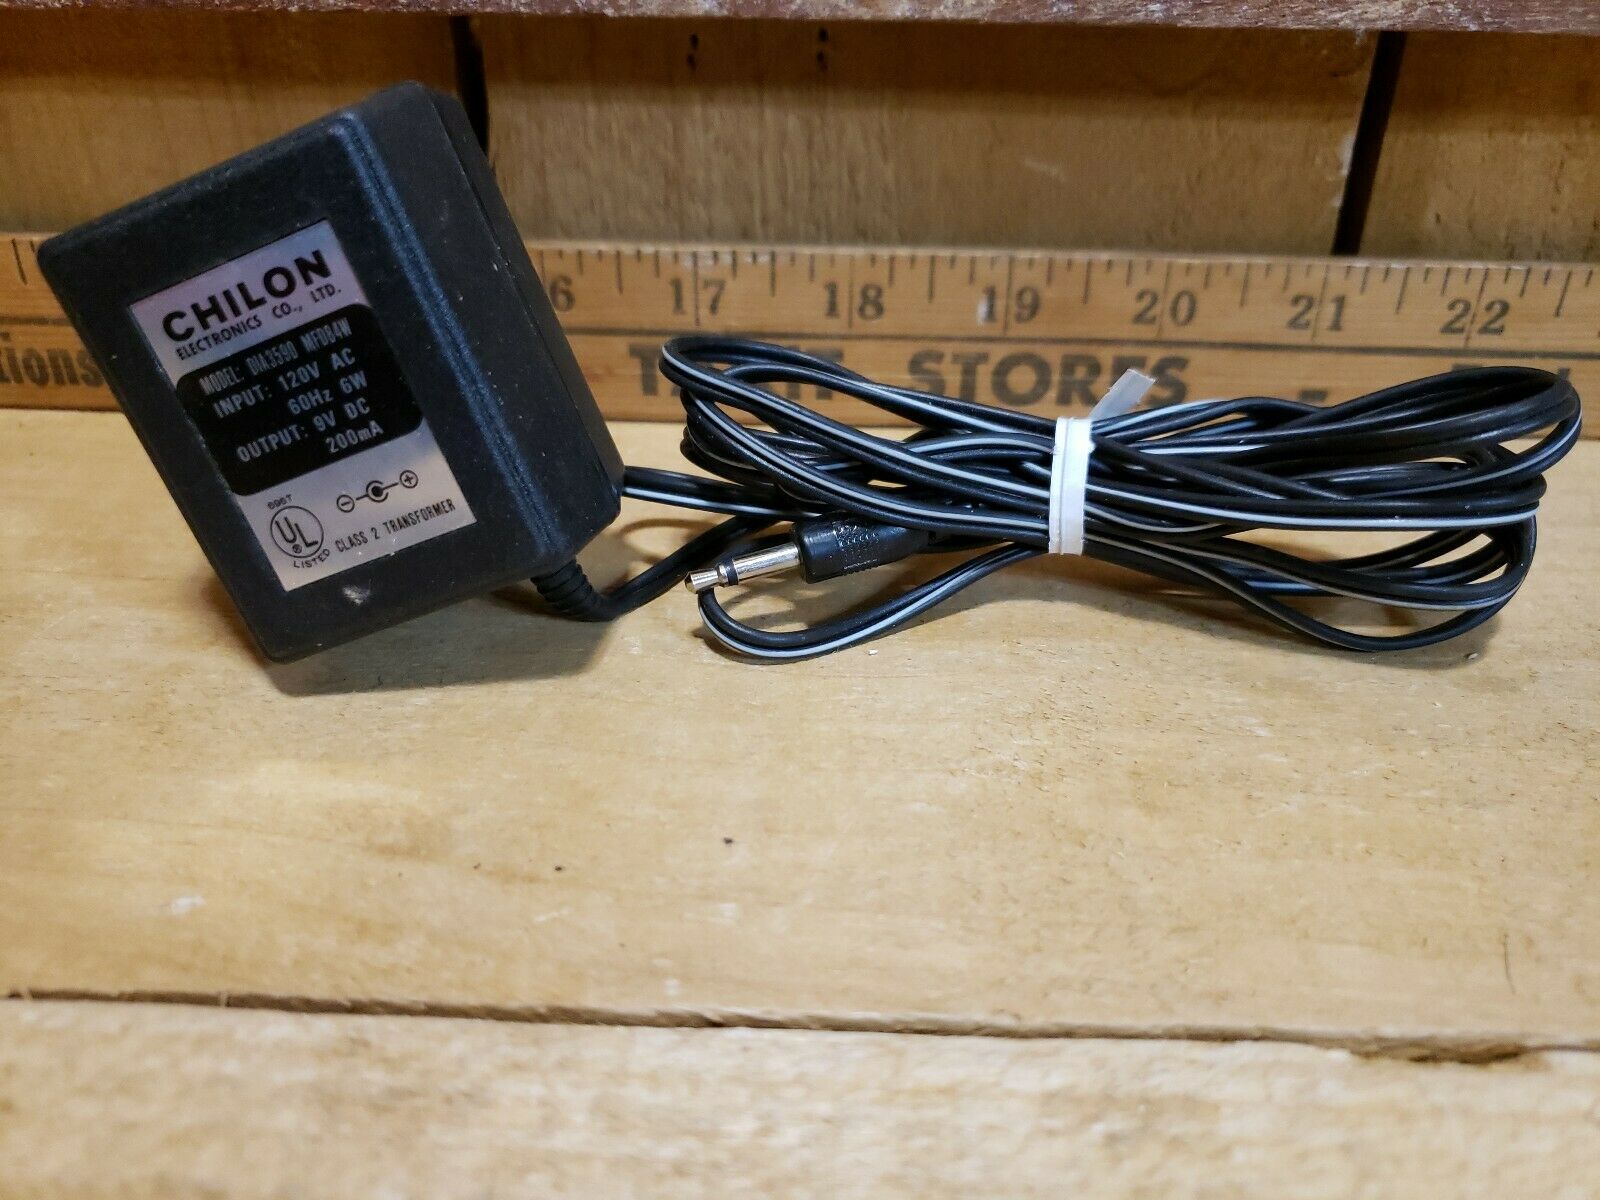 Vintage Chilon Electronics AC Adaptor Model No DIA3590 MFD84W Power Supply Cord Type: Power Cord Features: Portable,